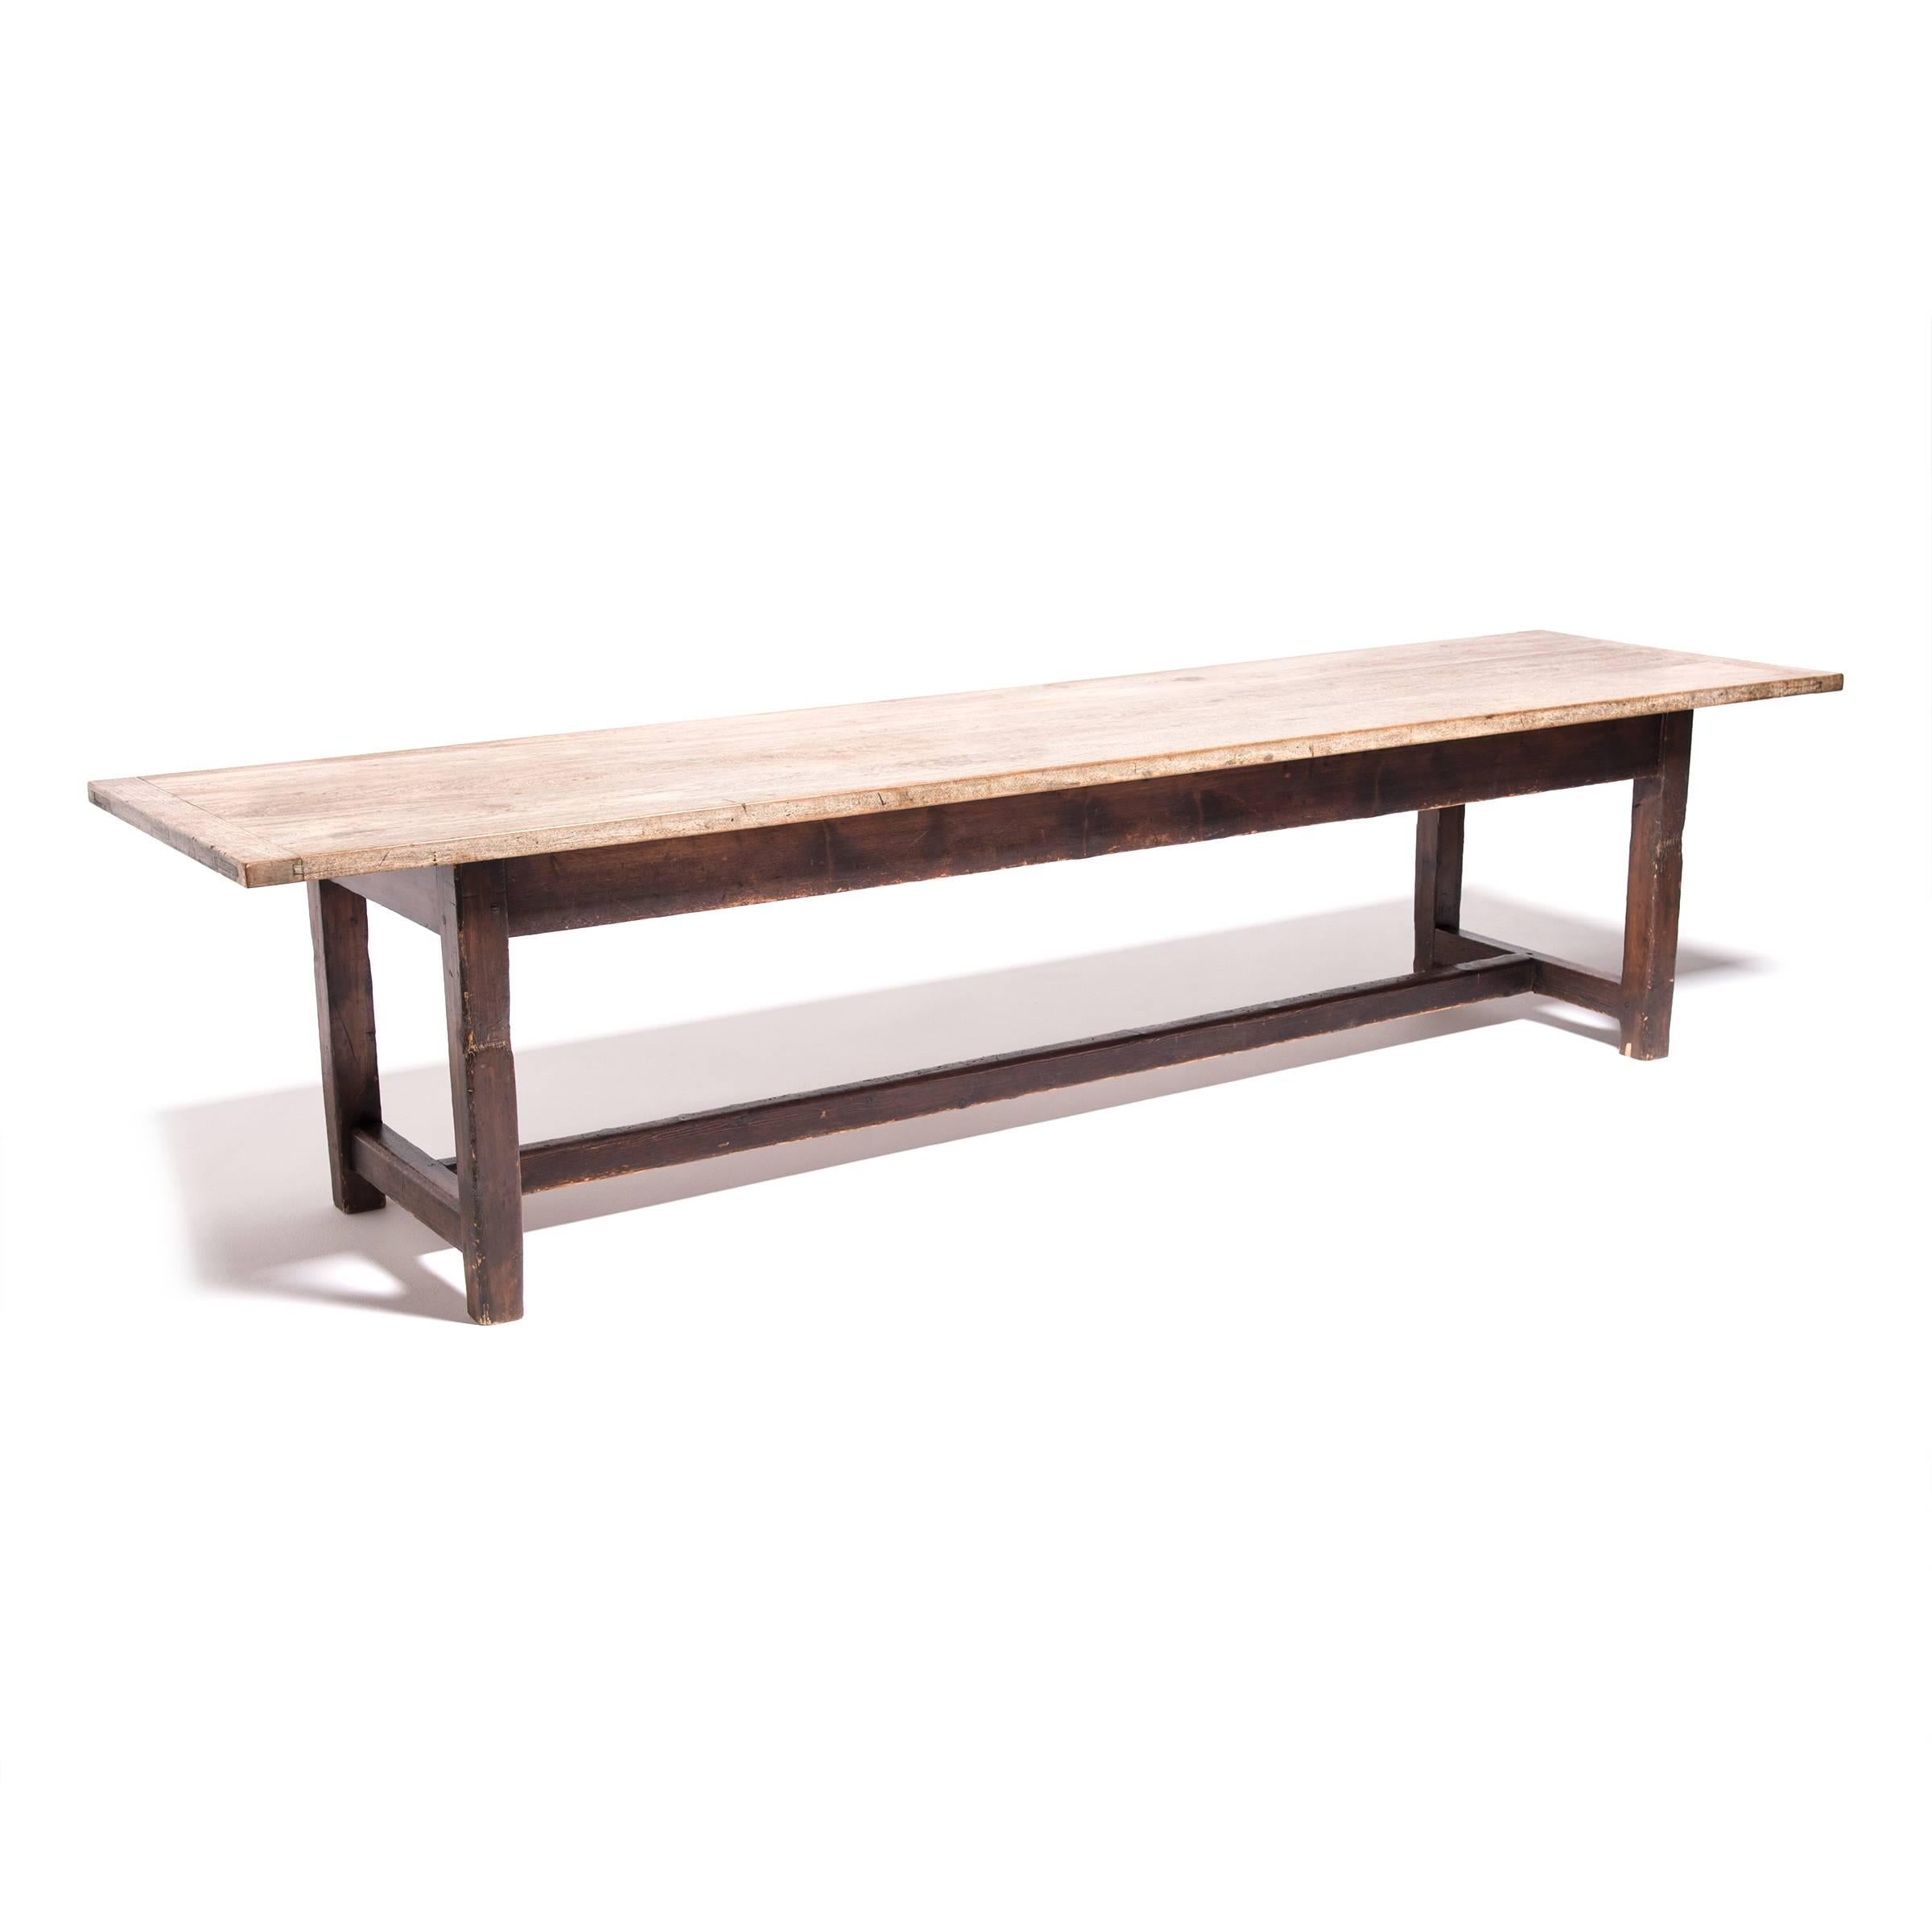 Born to host big gatherings, this 18th century English dining table’s humble design is based on the traditional refectory table. Long and rectangular, this type of table served communal meals in medieval monasteries. Made of Welsh oak, the